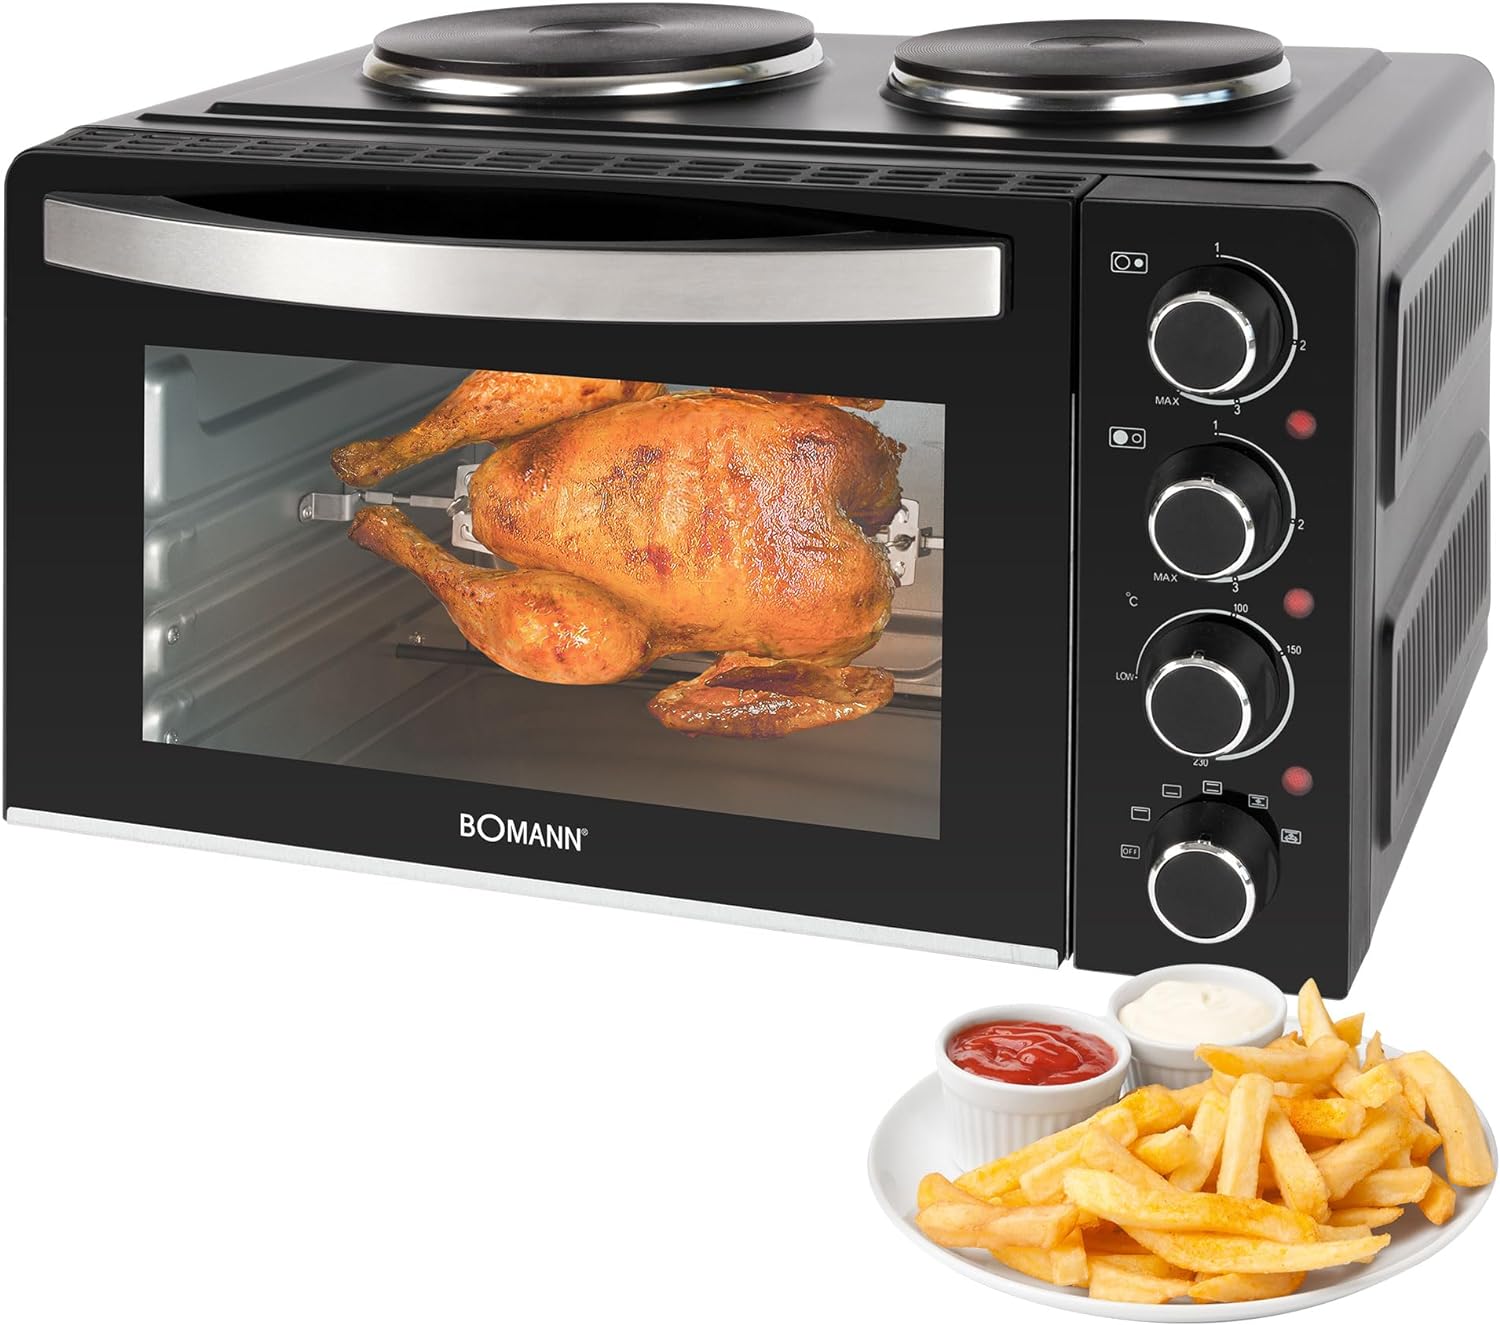 Bomann® KK 6059 CB Mini Oven with Hotplates and Rotisserie | Cooking and Baking Simultaneously | Mini Oven 28 L Convection Top / Bottom Heat 100° - 230°C | Electric Mini Oven 3100 Watt Including